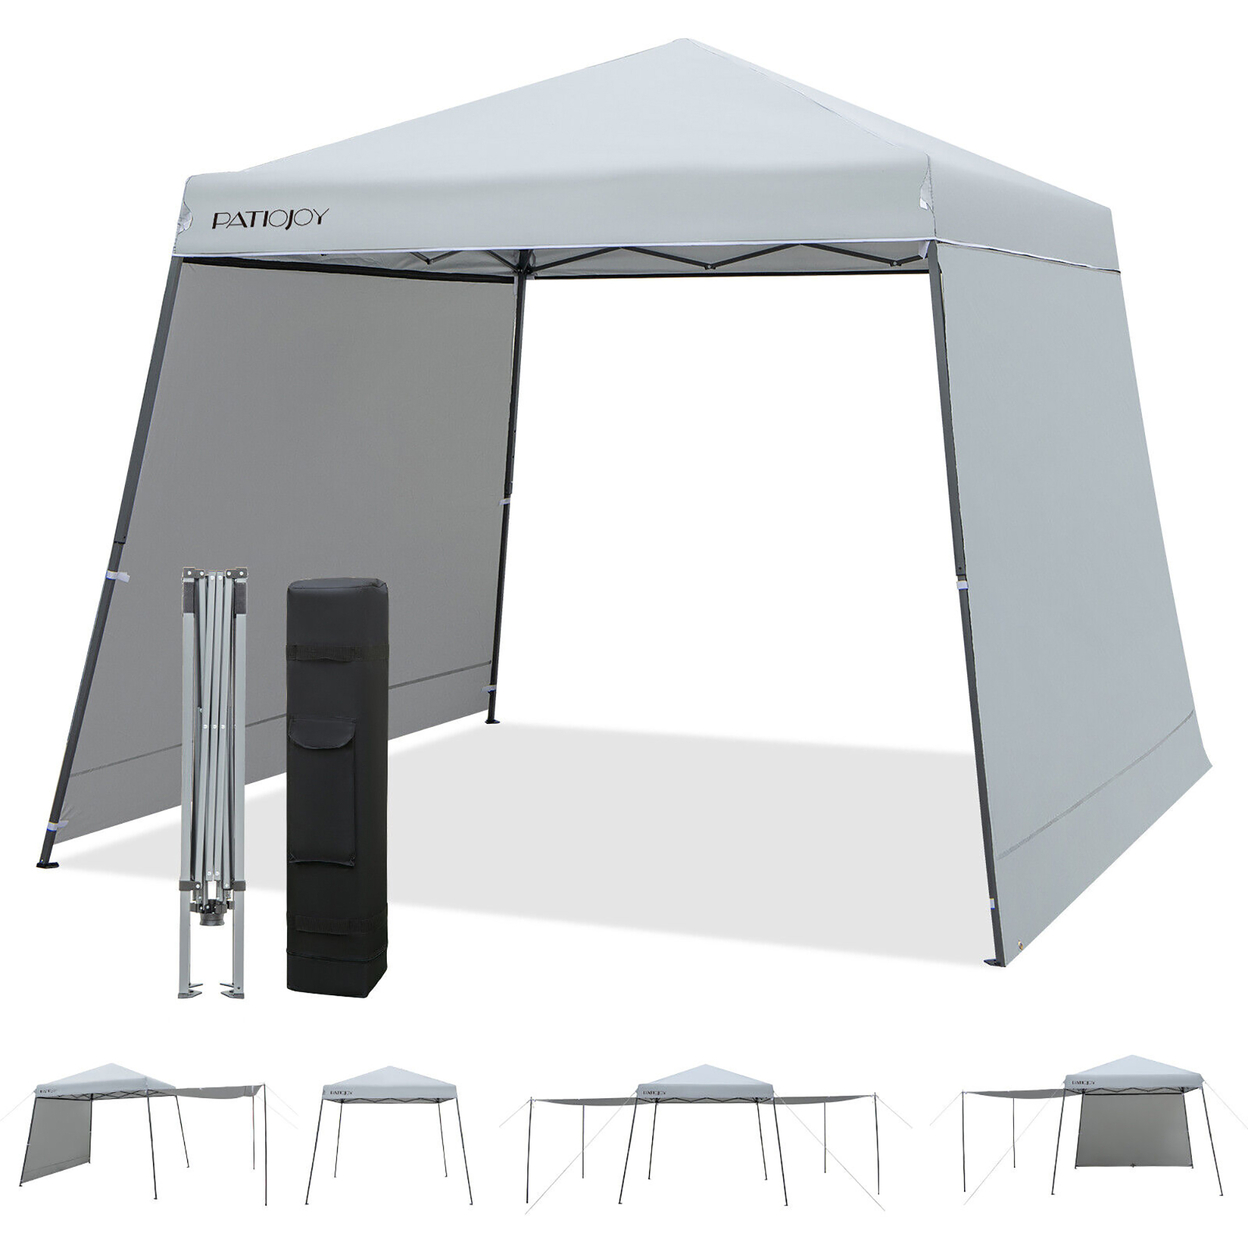 Patio 10 X 10FT Instant Pop-up Canopy Folding Tent W/ Sidewalls & Awnings Outdoor